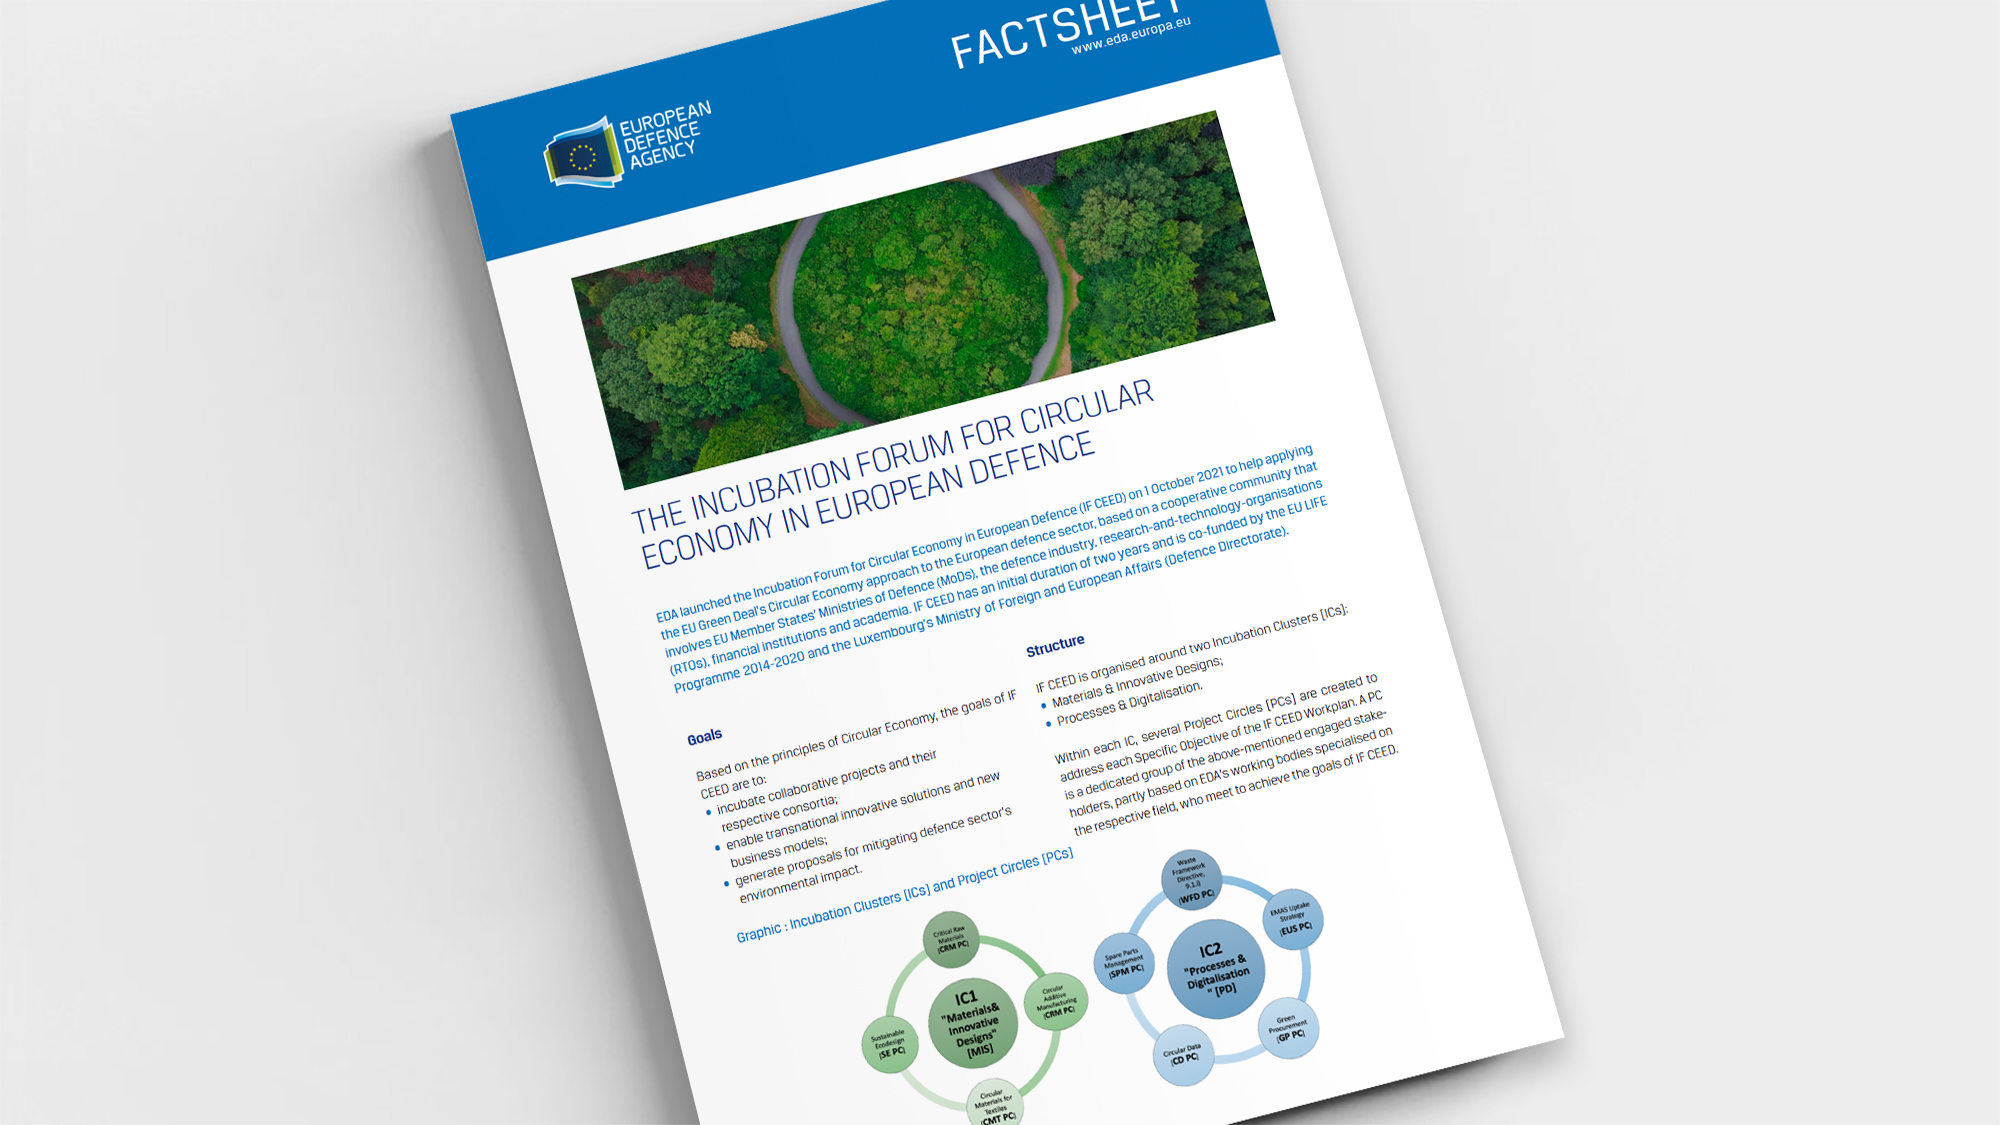 Factsheet: The Incubation Forum for Circular Economy in European Defence